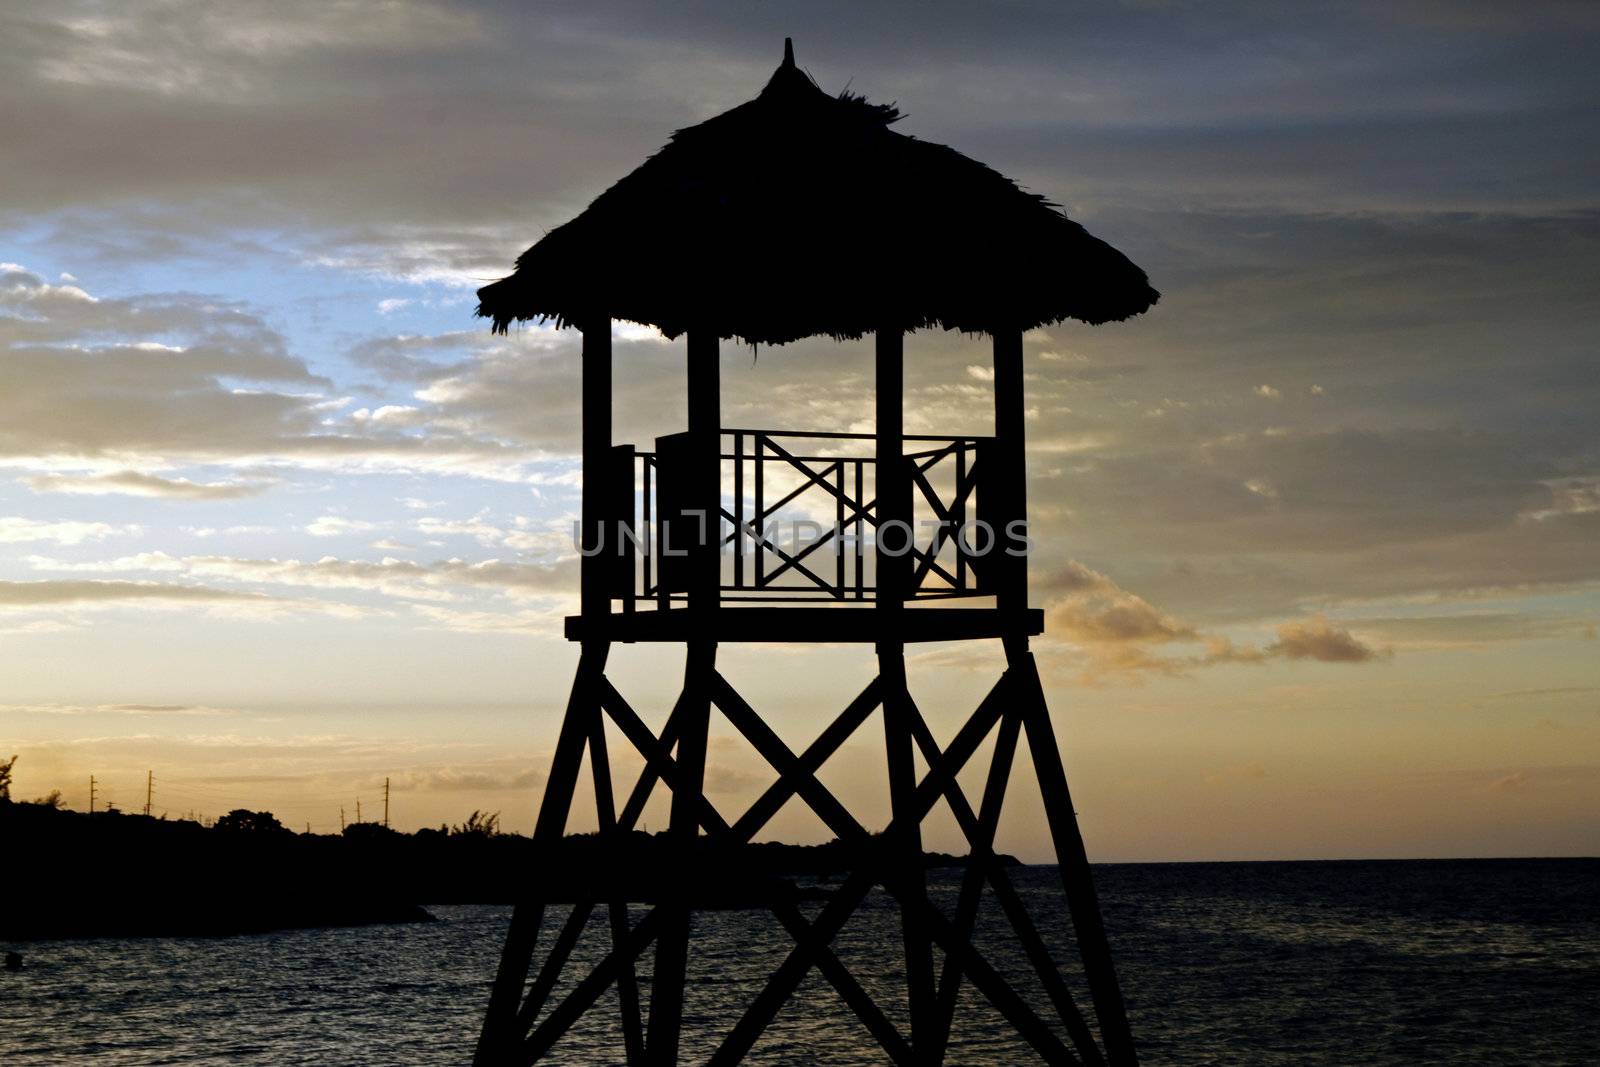 Tropical watchtower overlooking a beach silhouette at sunset